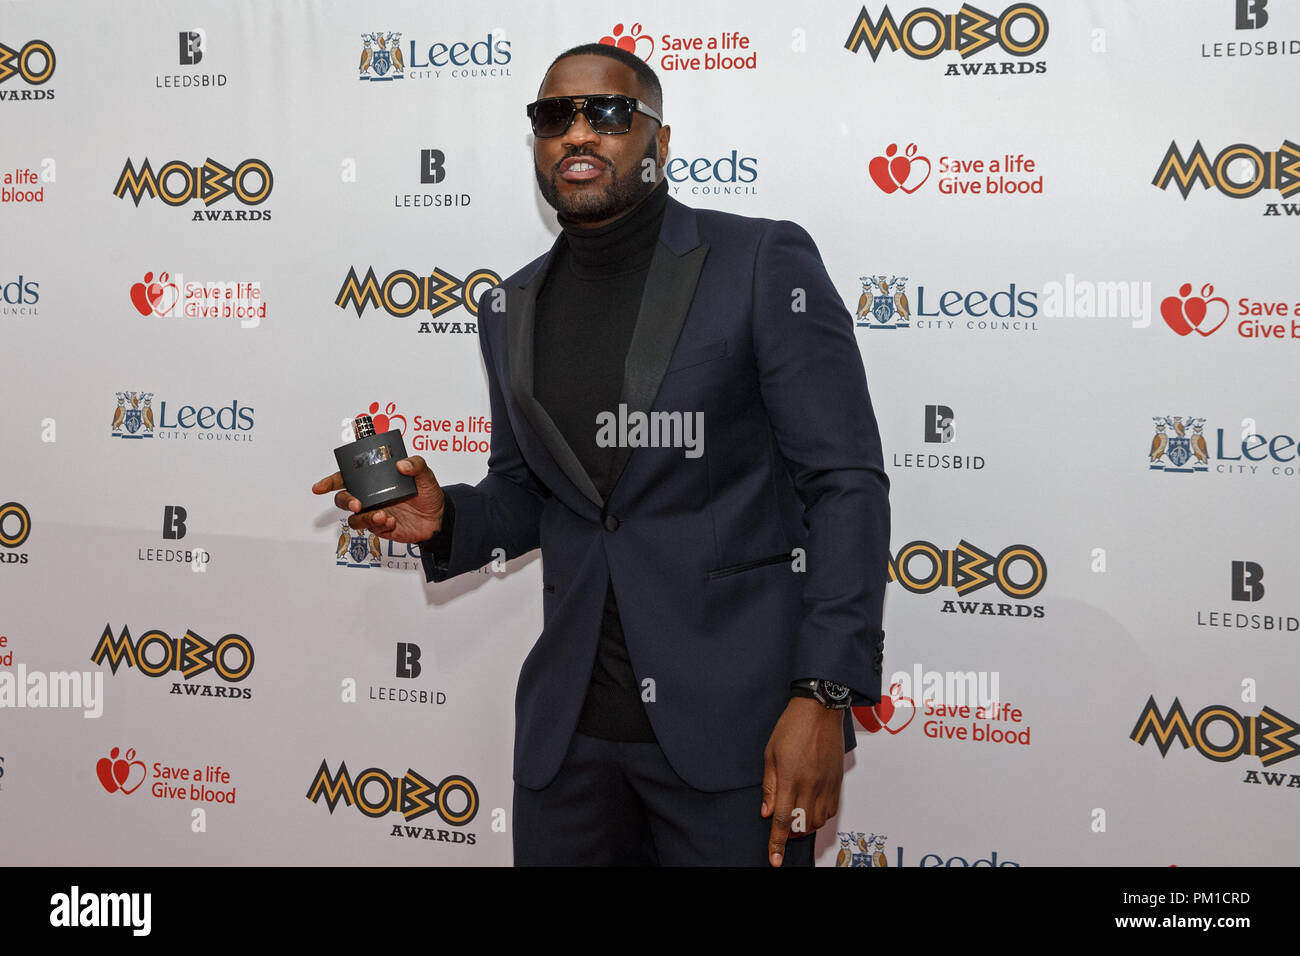 English rapper Lethal Bizzle posing on the red carpet at the 2017 MOBO Awards. The aftershave he is holding is his own brand. He presented at award at the event. Stock Photo